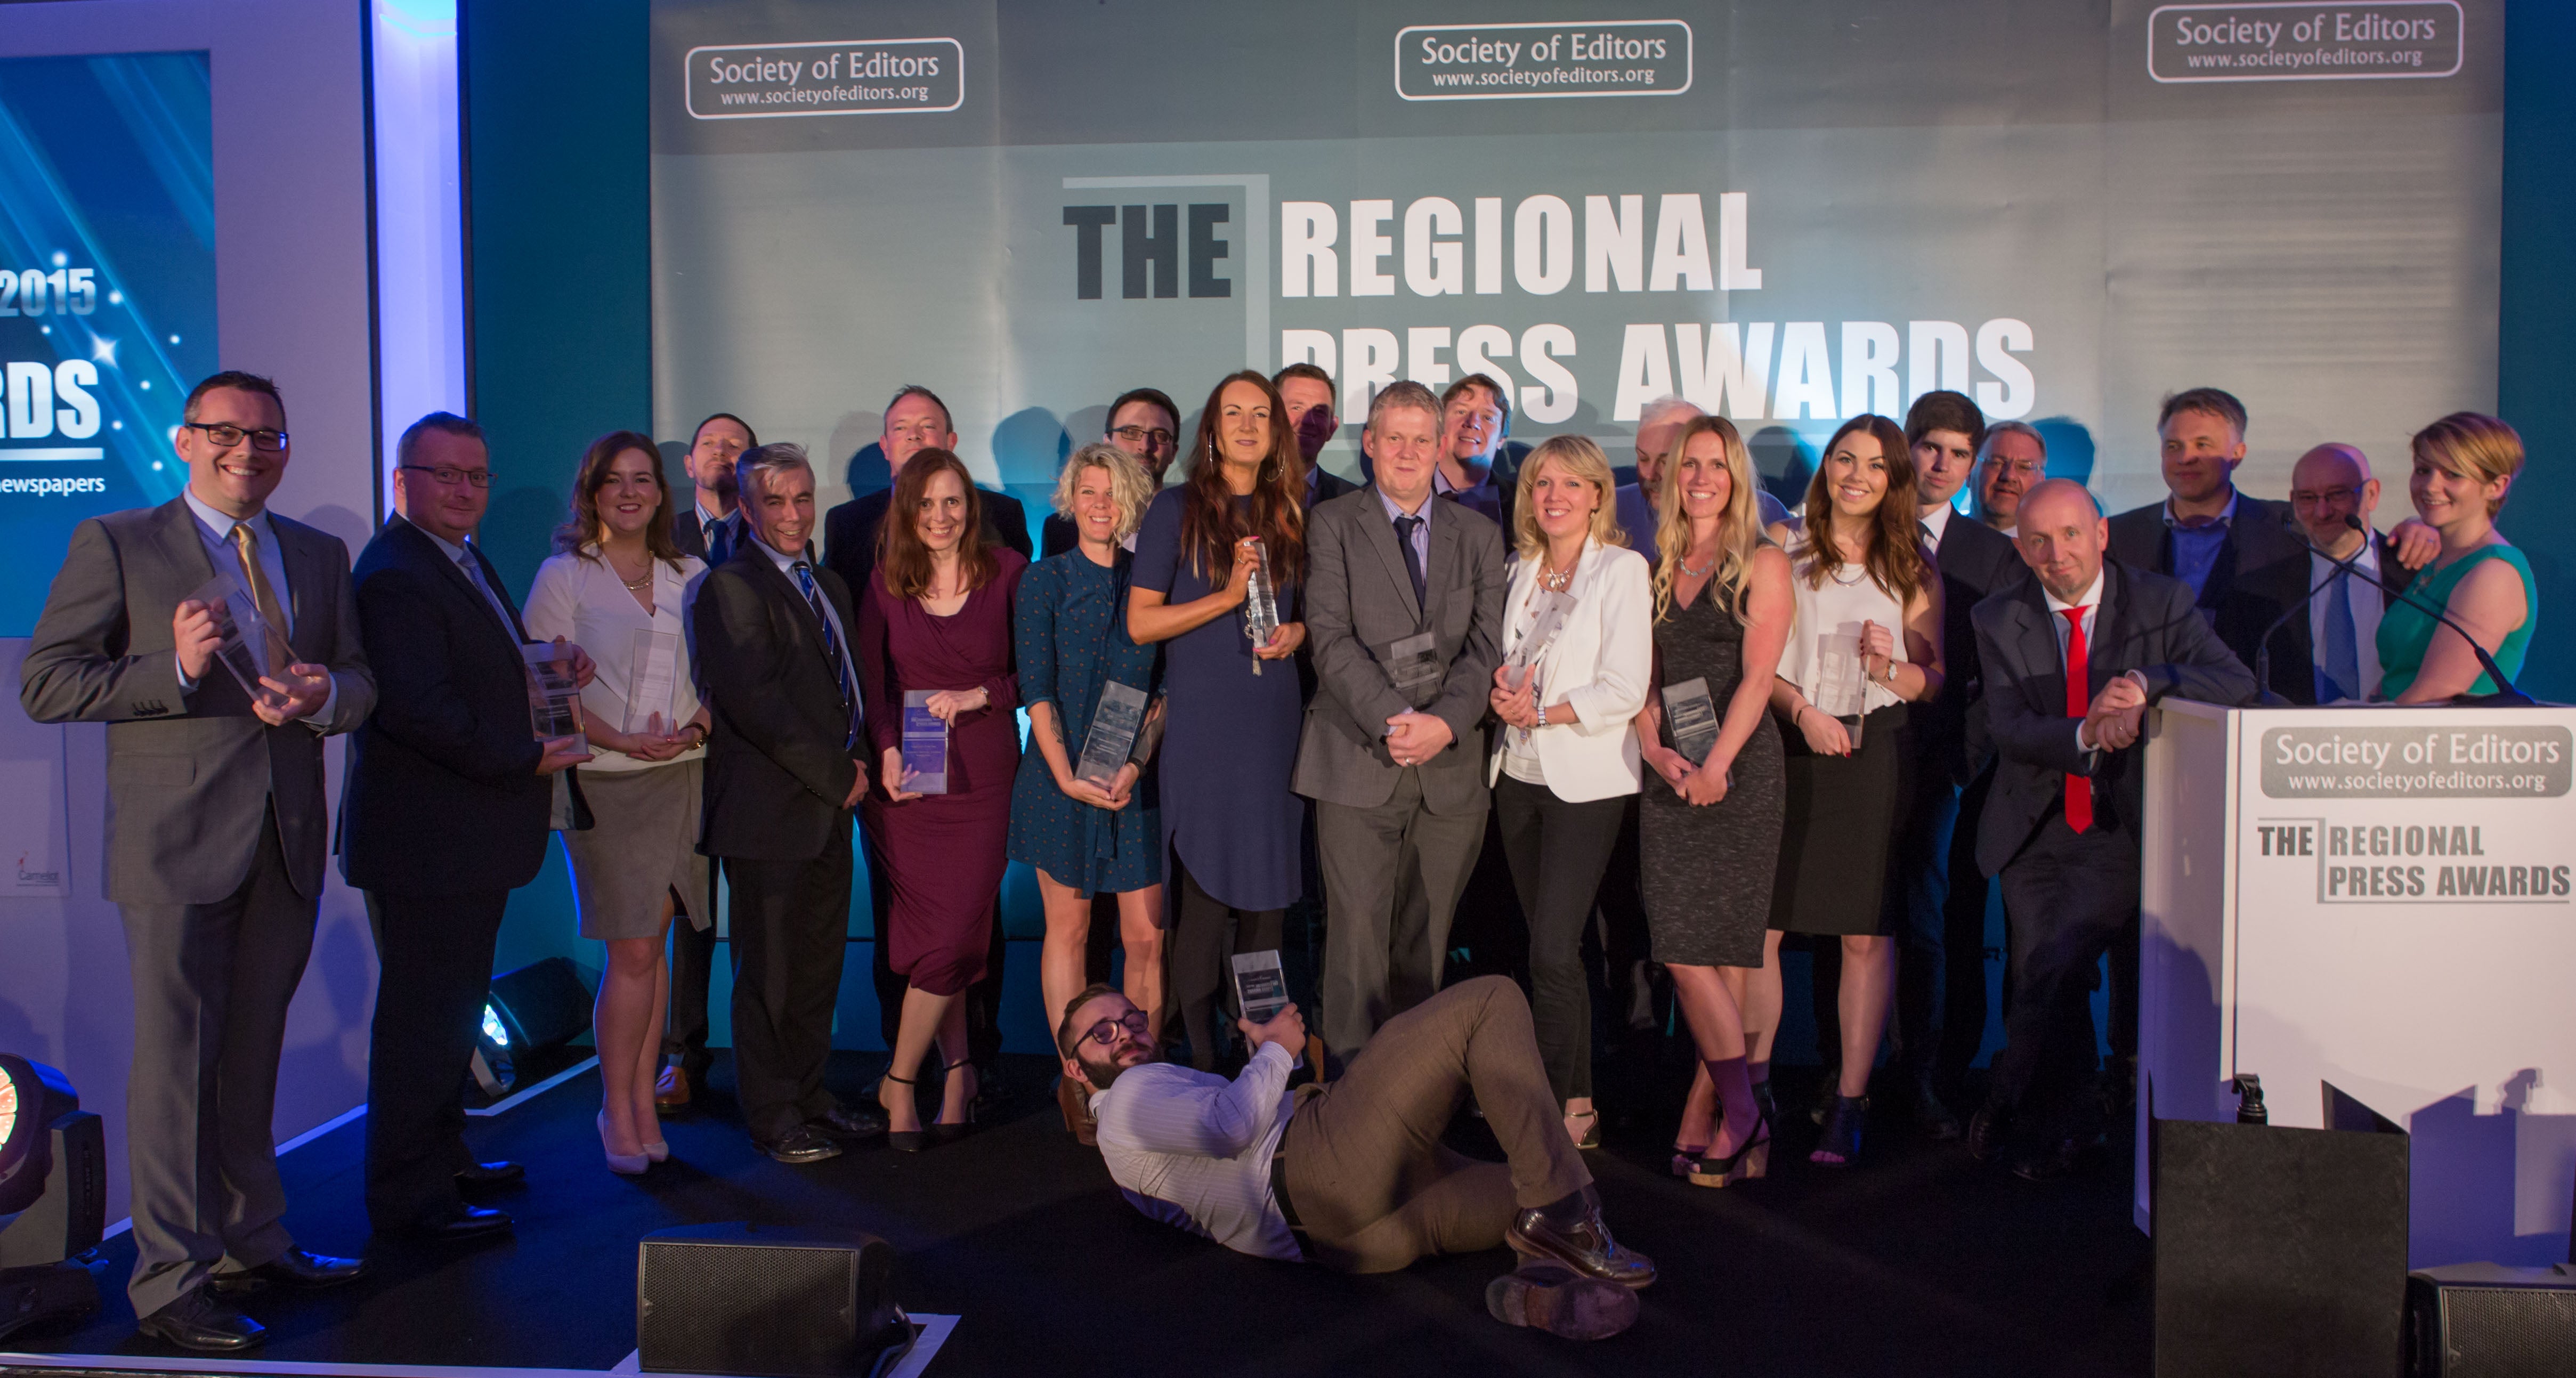 Regional Press Awards: Fourth reporting prize for Croydon's Gareth Davies, double win for Birmingham's Jeanette Oldham